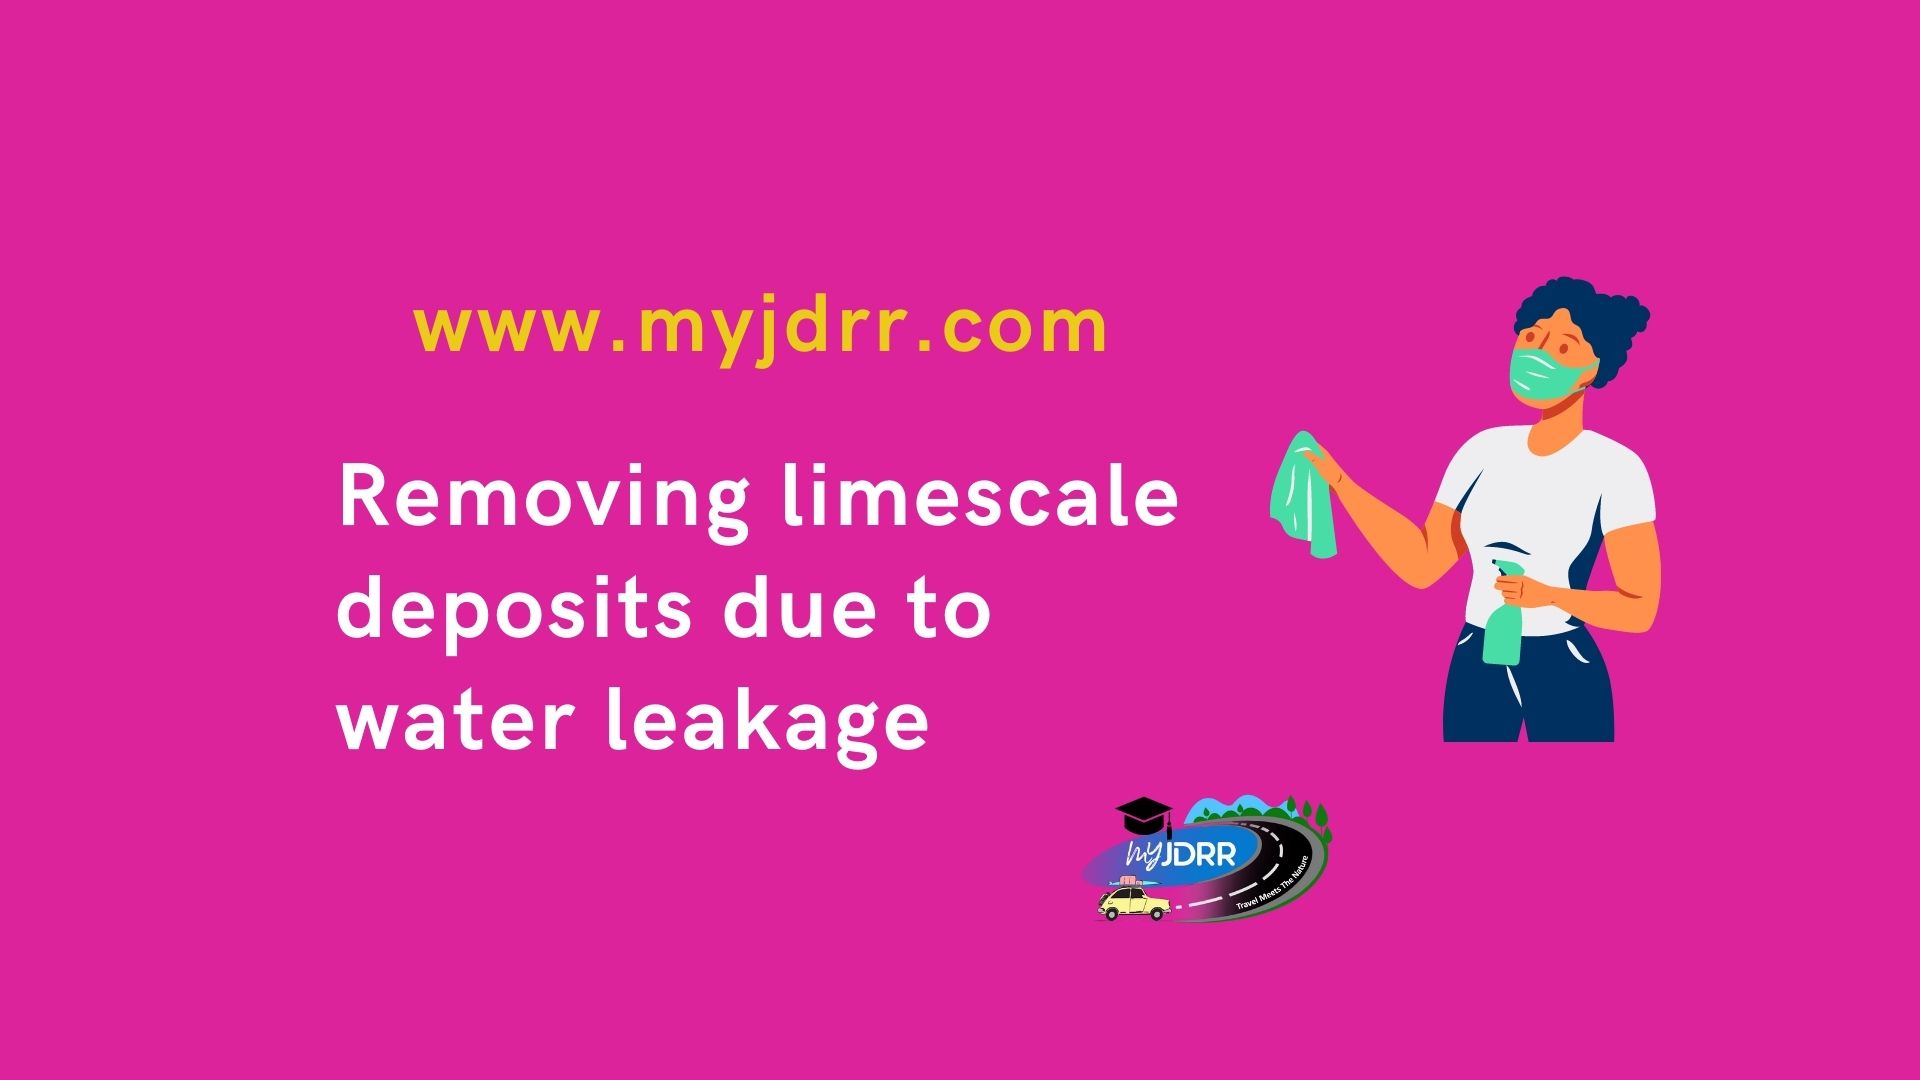 Removing limescale deposits due to water leakage